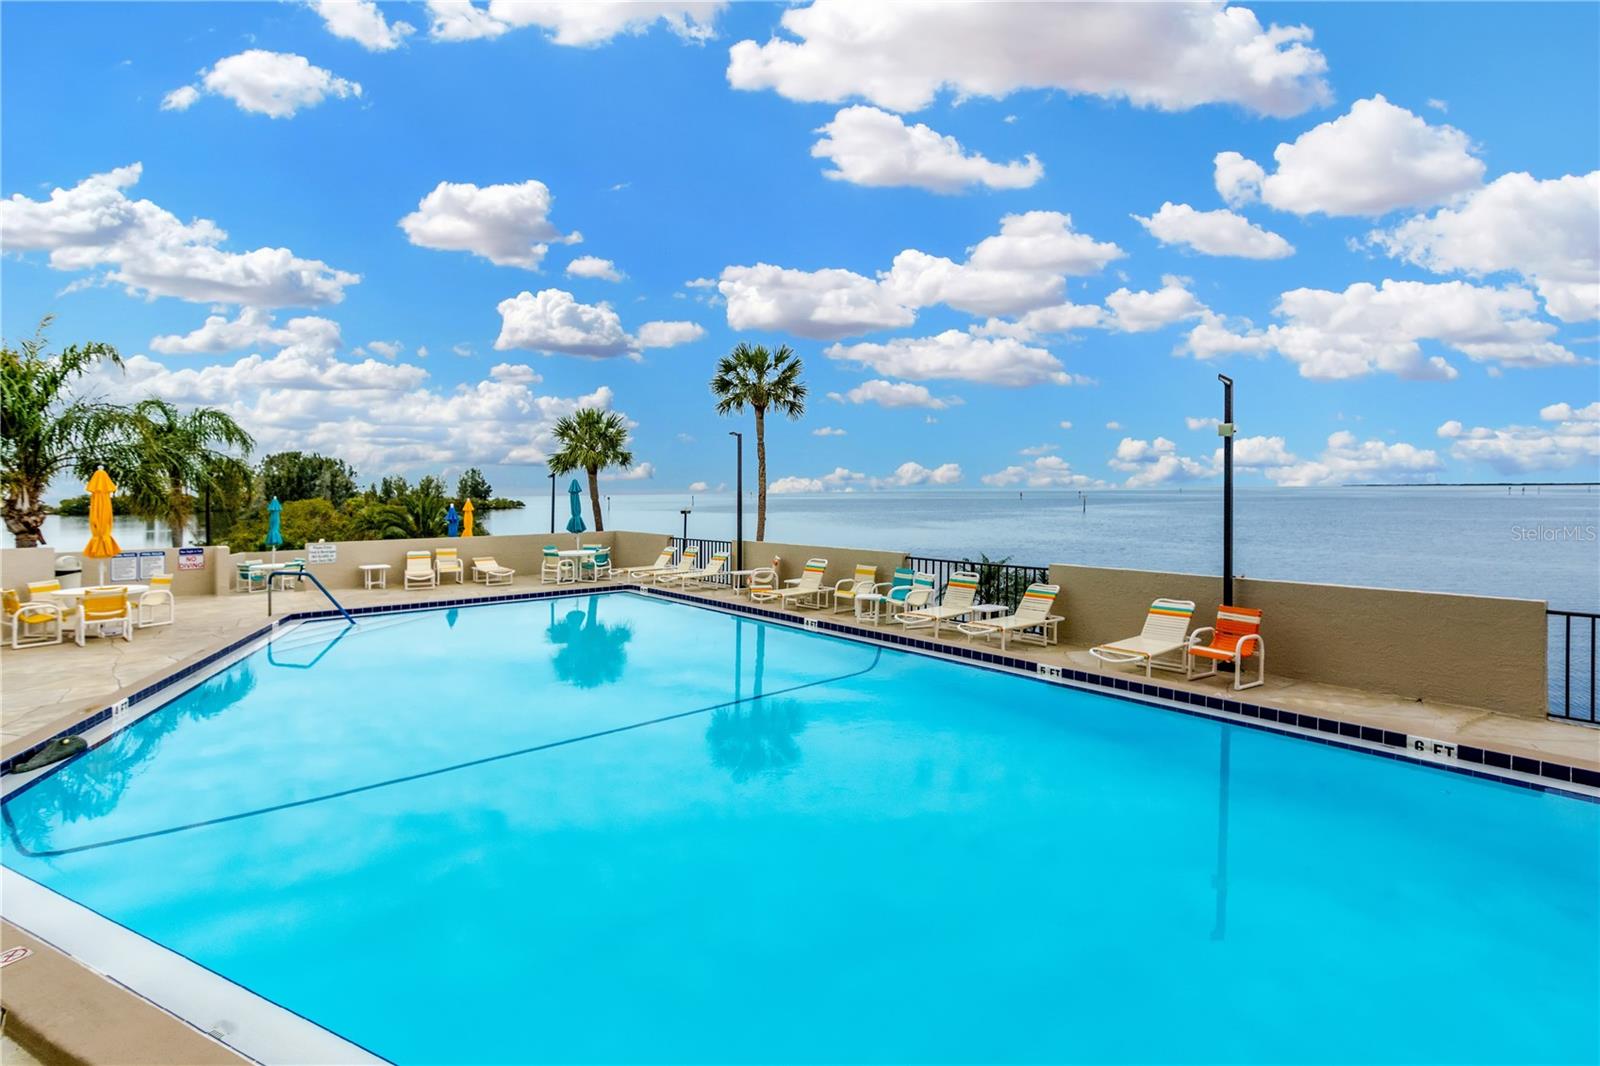 Time to step outside to enjoy this expansive pool /deck overlooking Gulf waters.